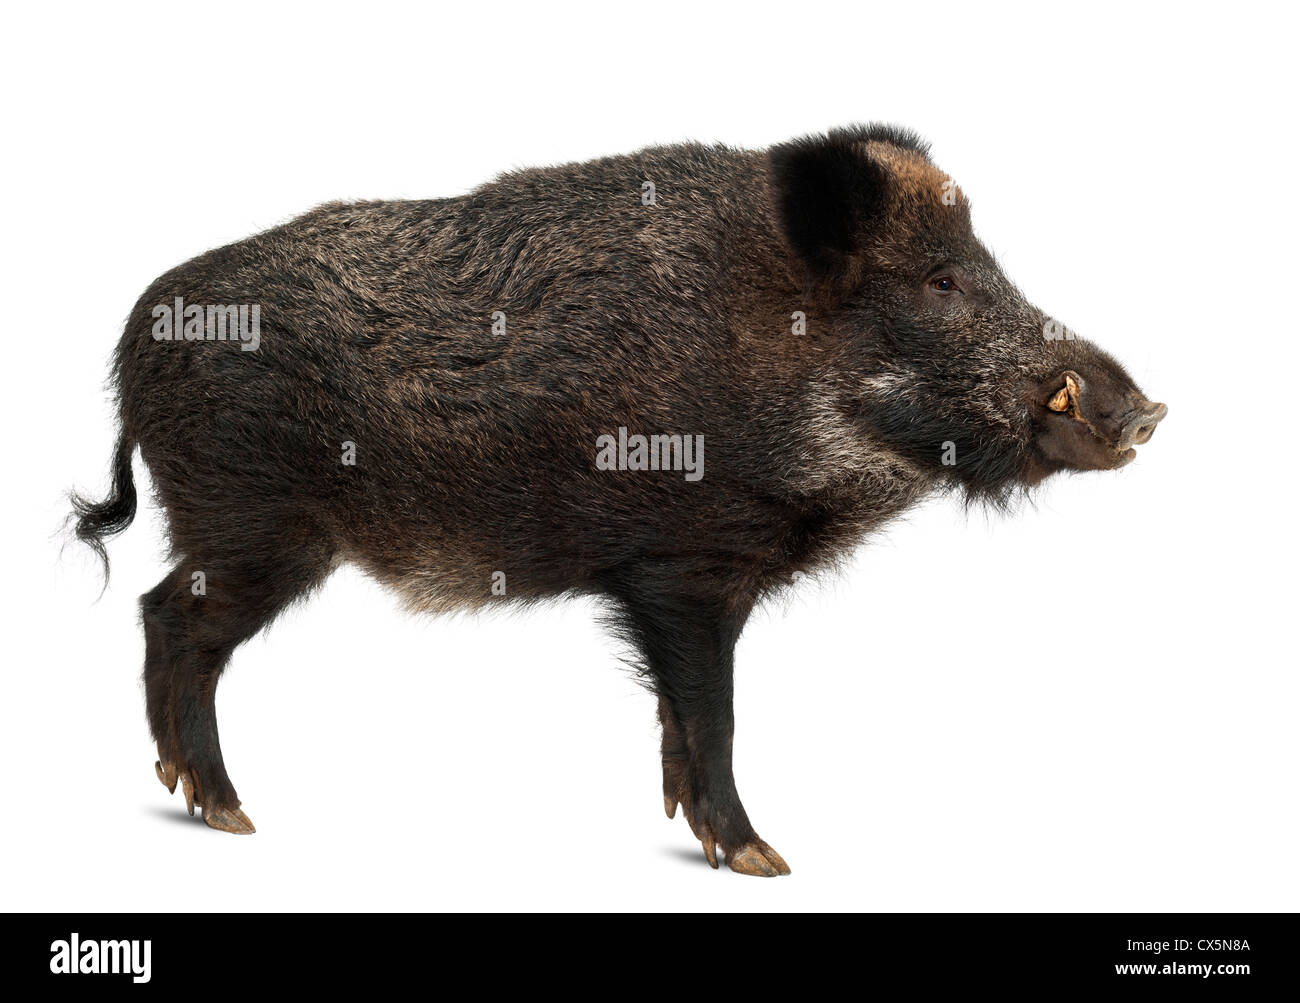 Wild boar, also known as wild pig, Sus scrofa, 15 years old, standing against white background Stock Photo